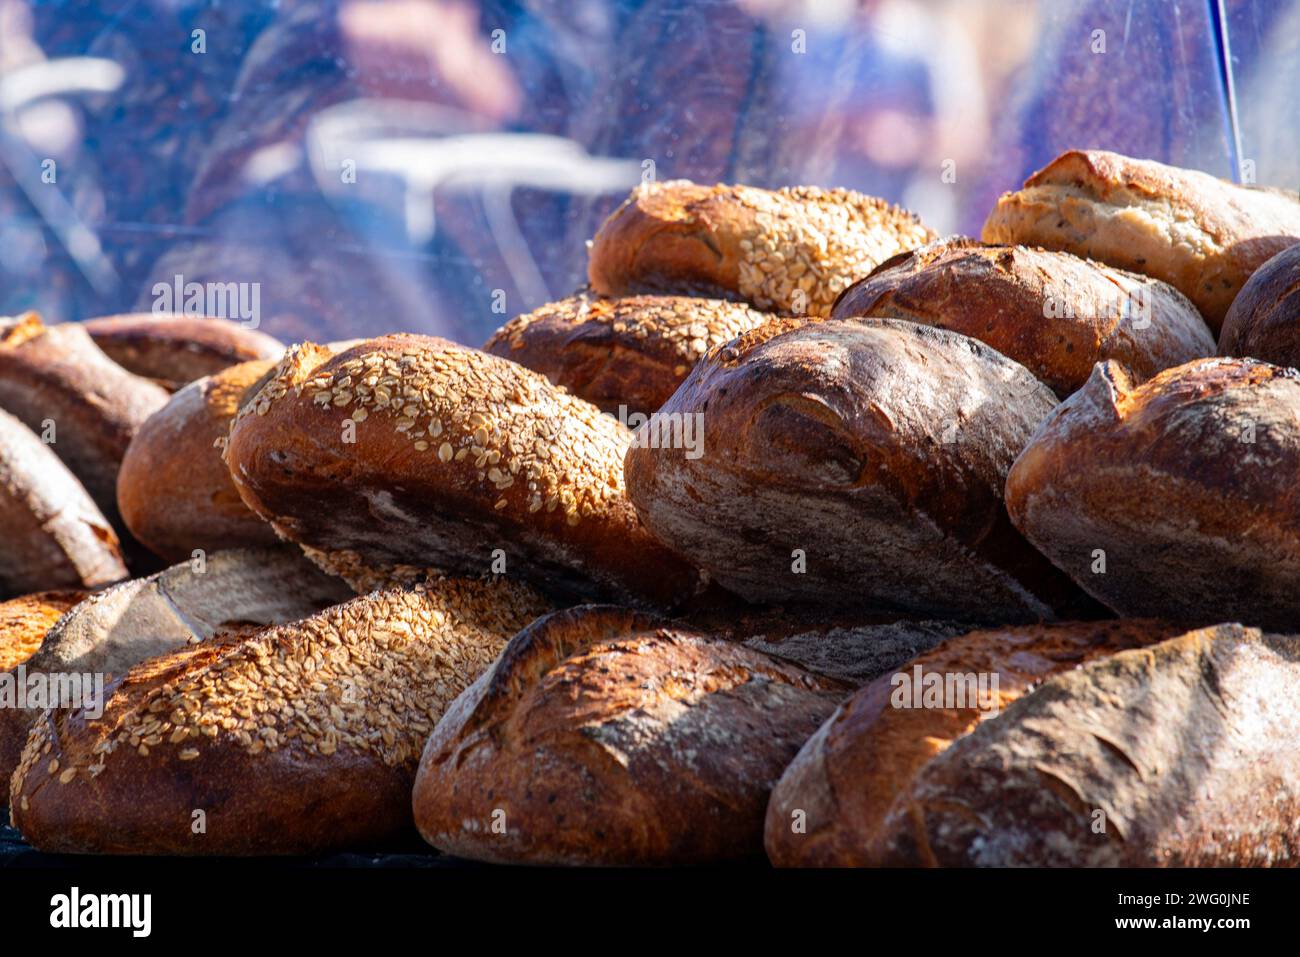 Freshly baked Sourdough breads at an open air market in Sydney, Australia in the early morning Stock Photo